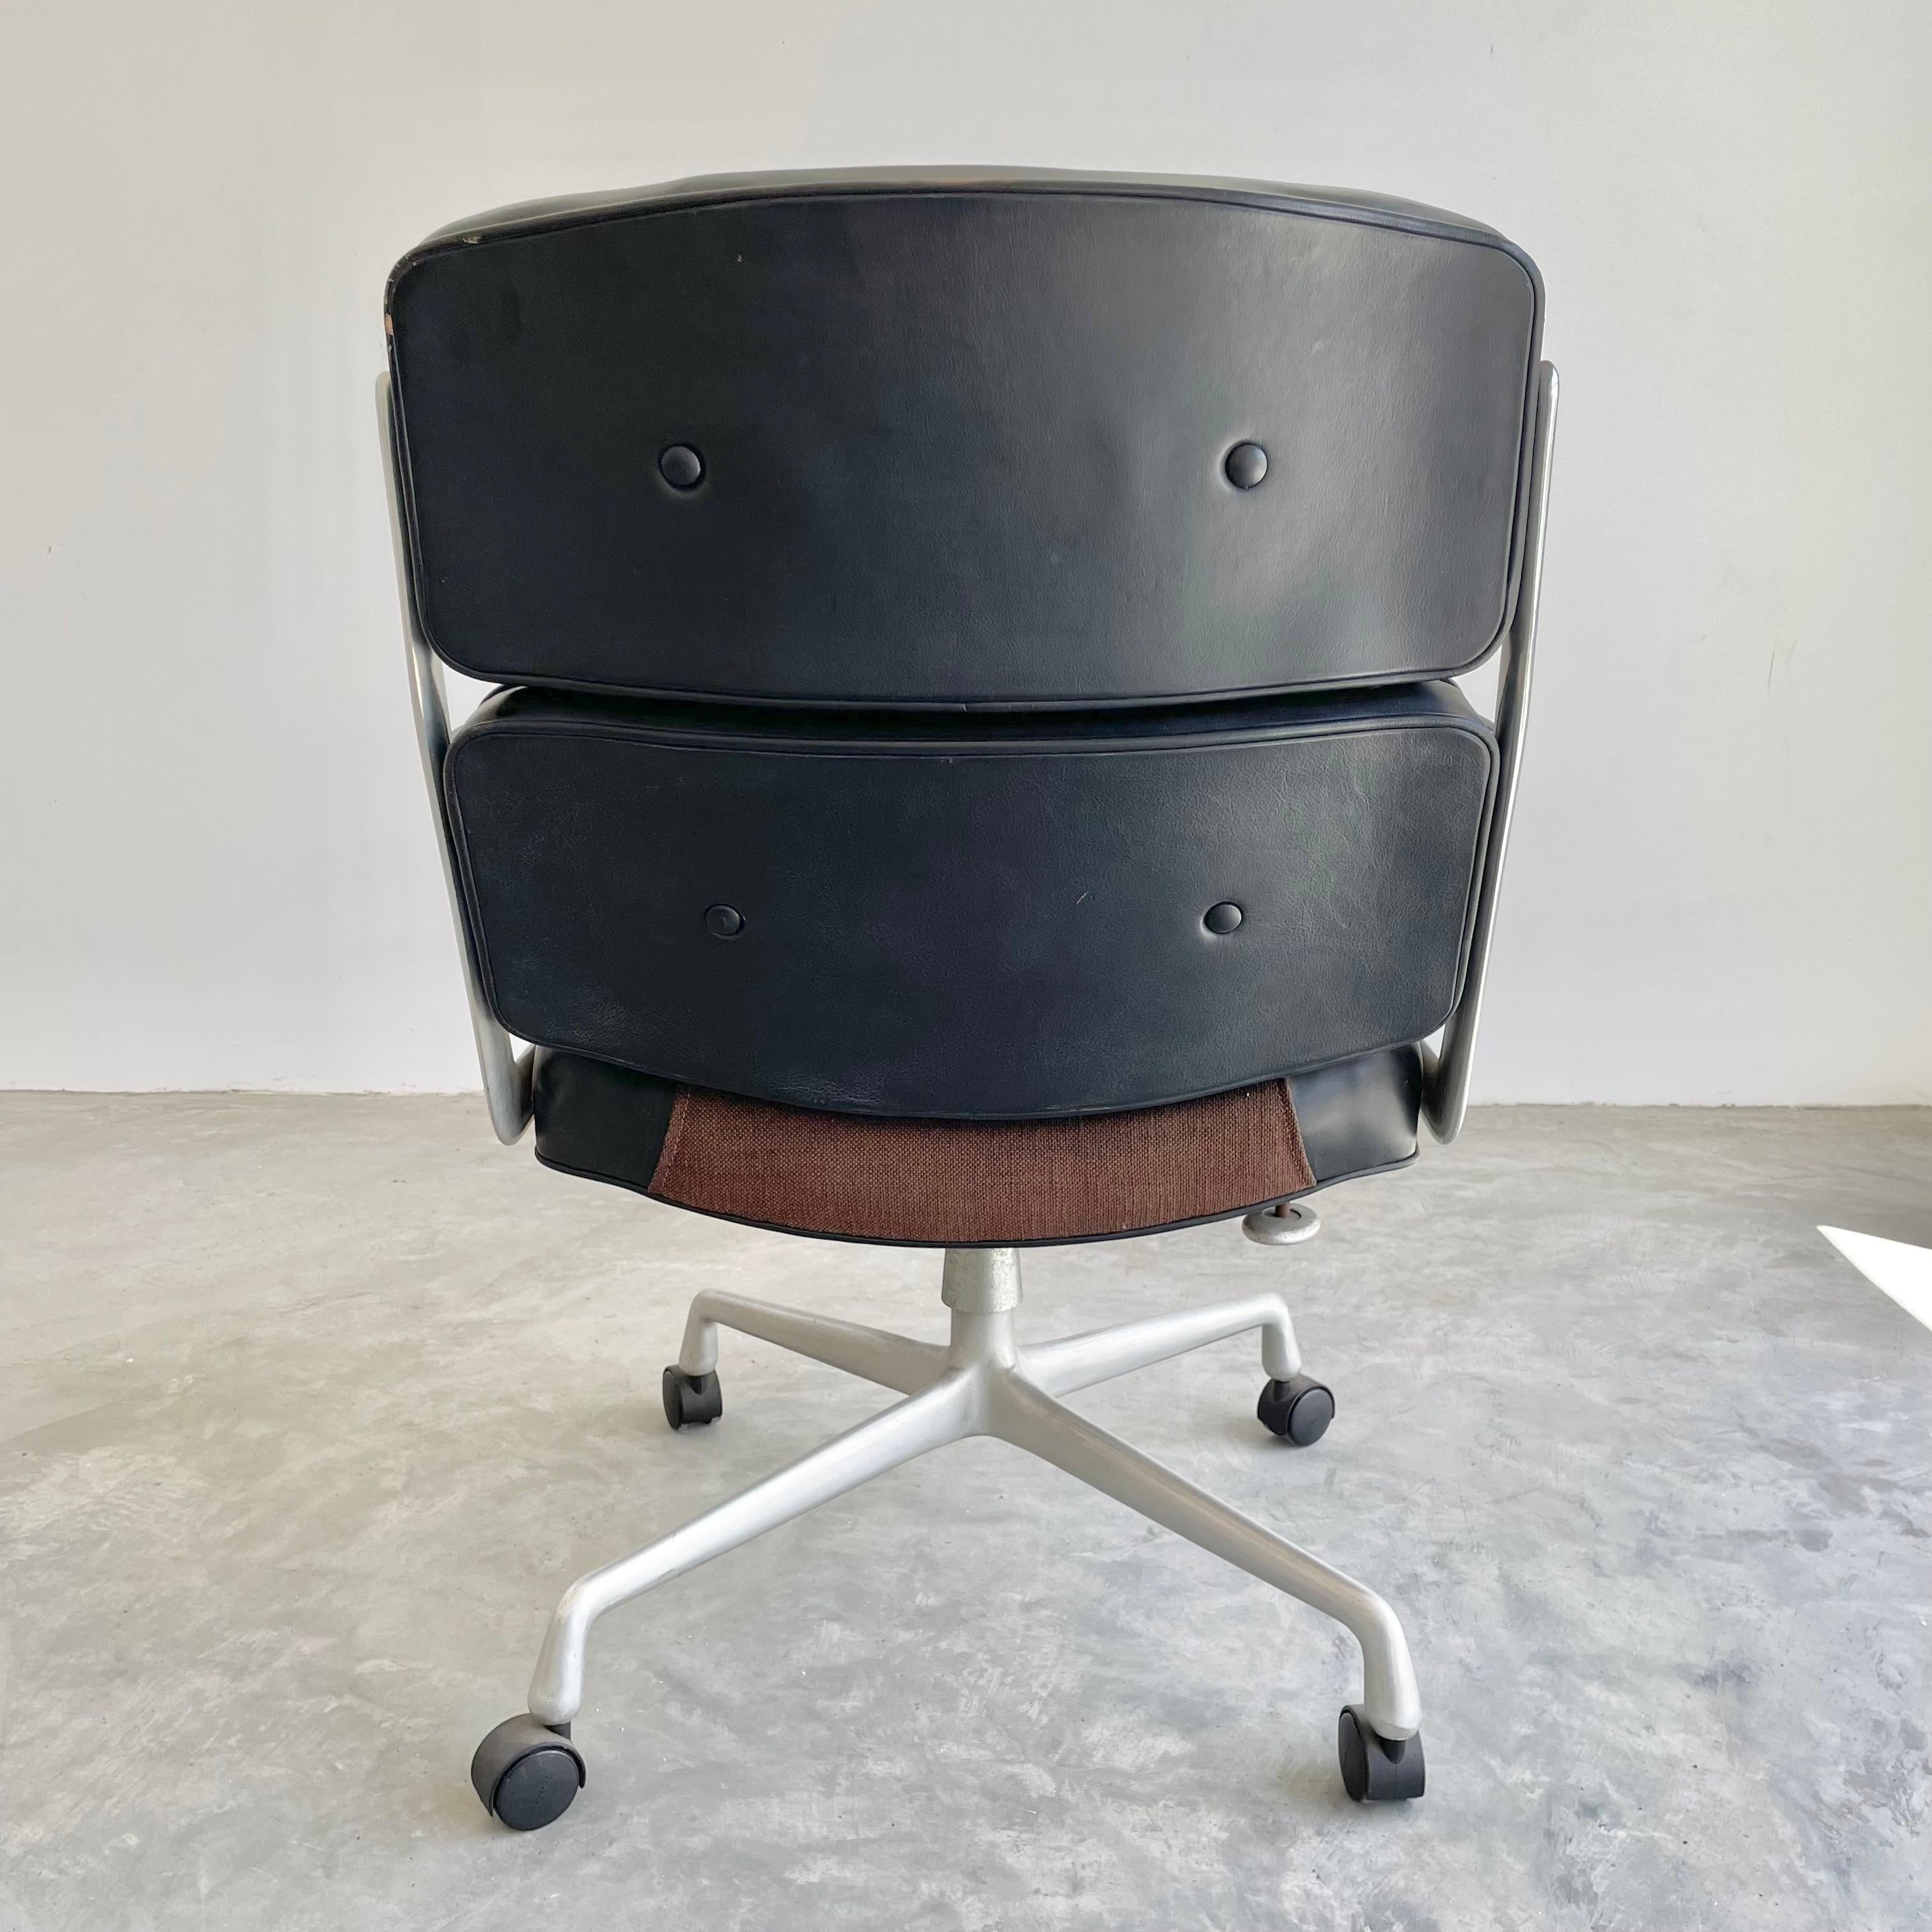 North American Eames Time Life Chair in Black Leather for Herman Miller, 1970s USA